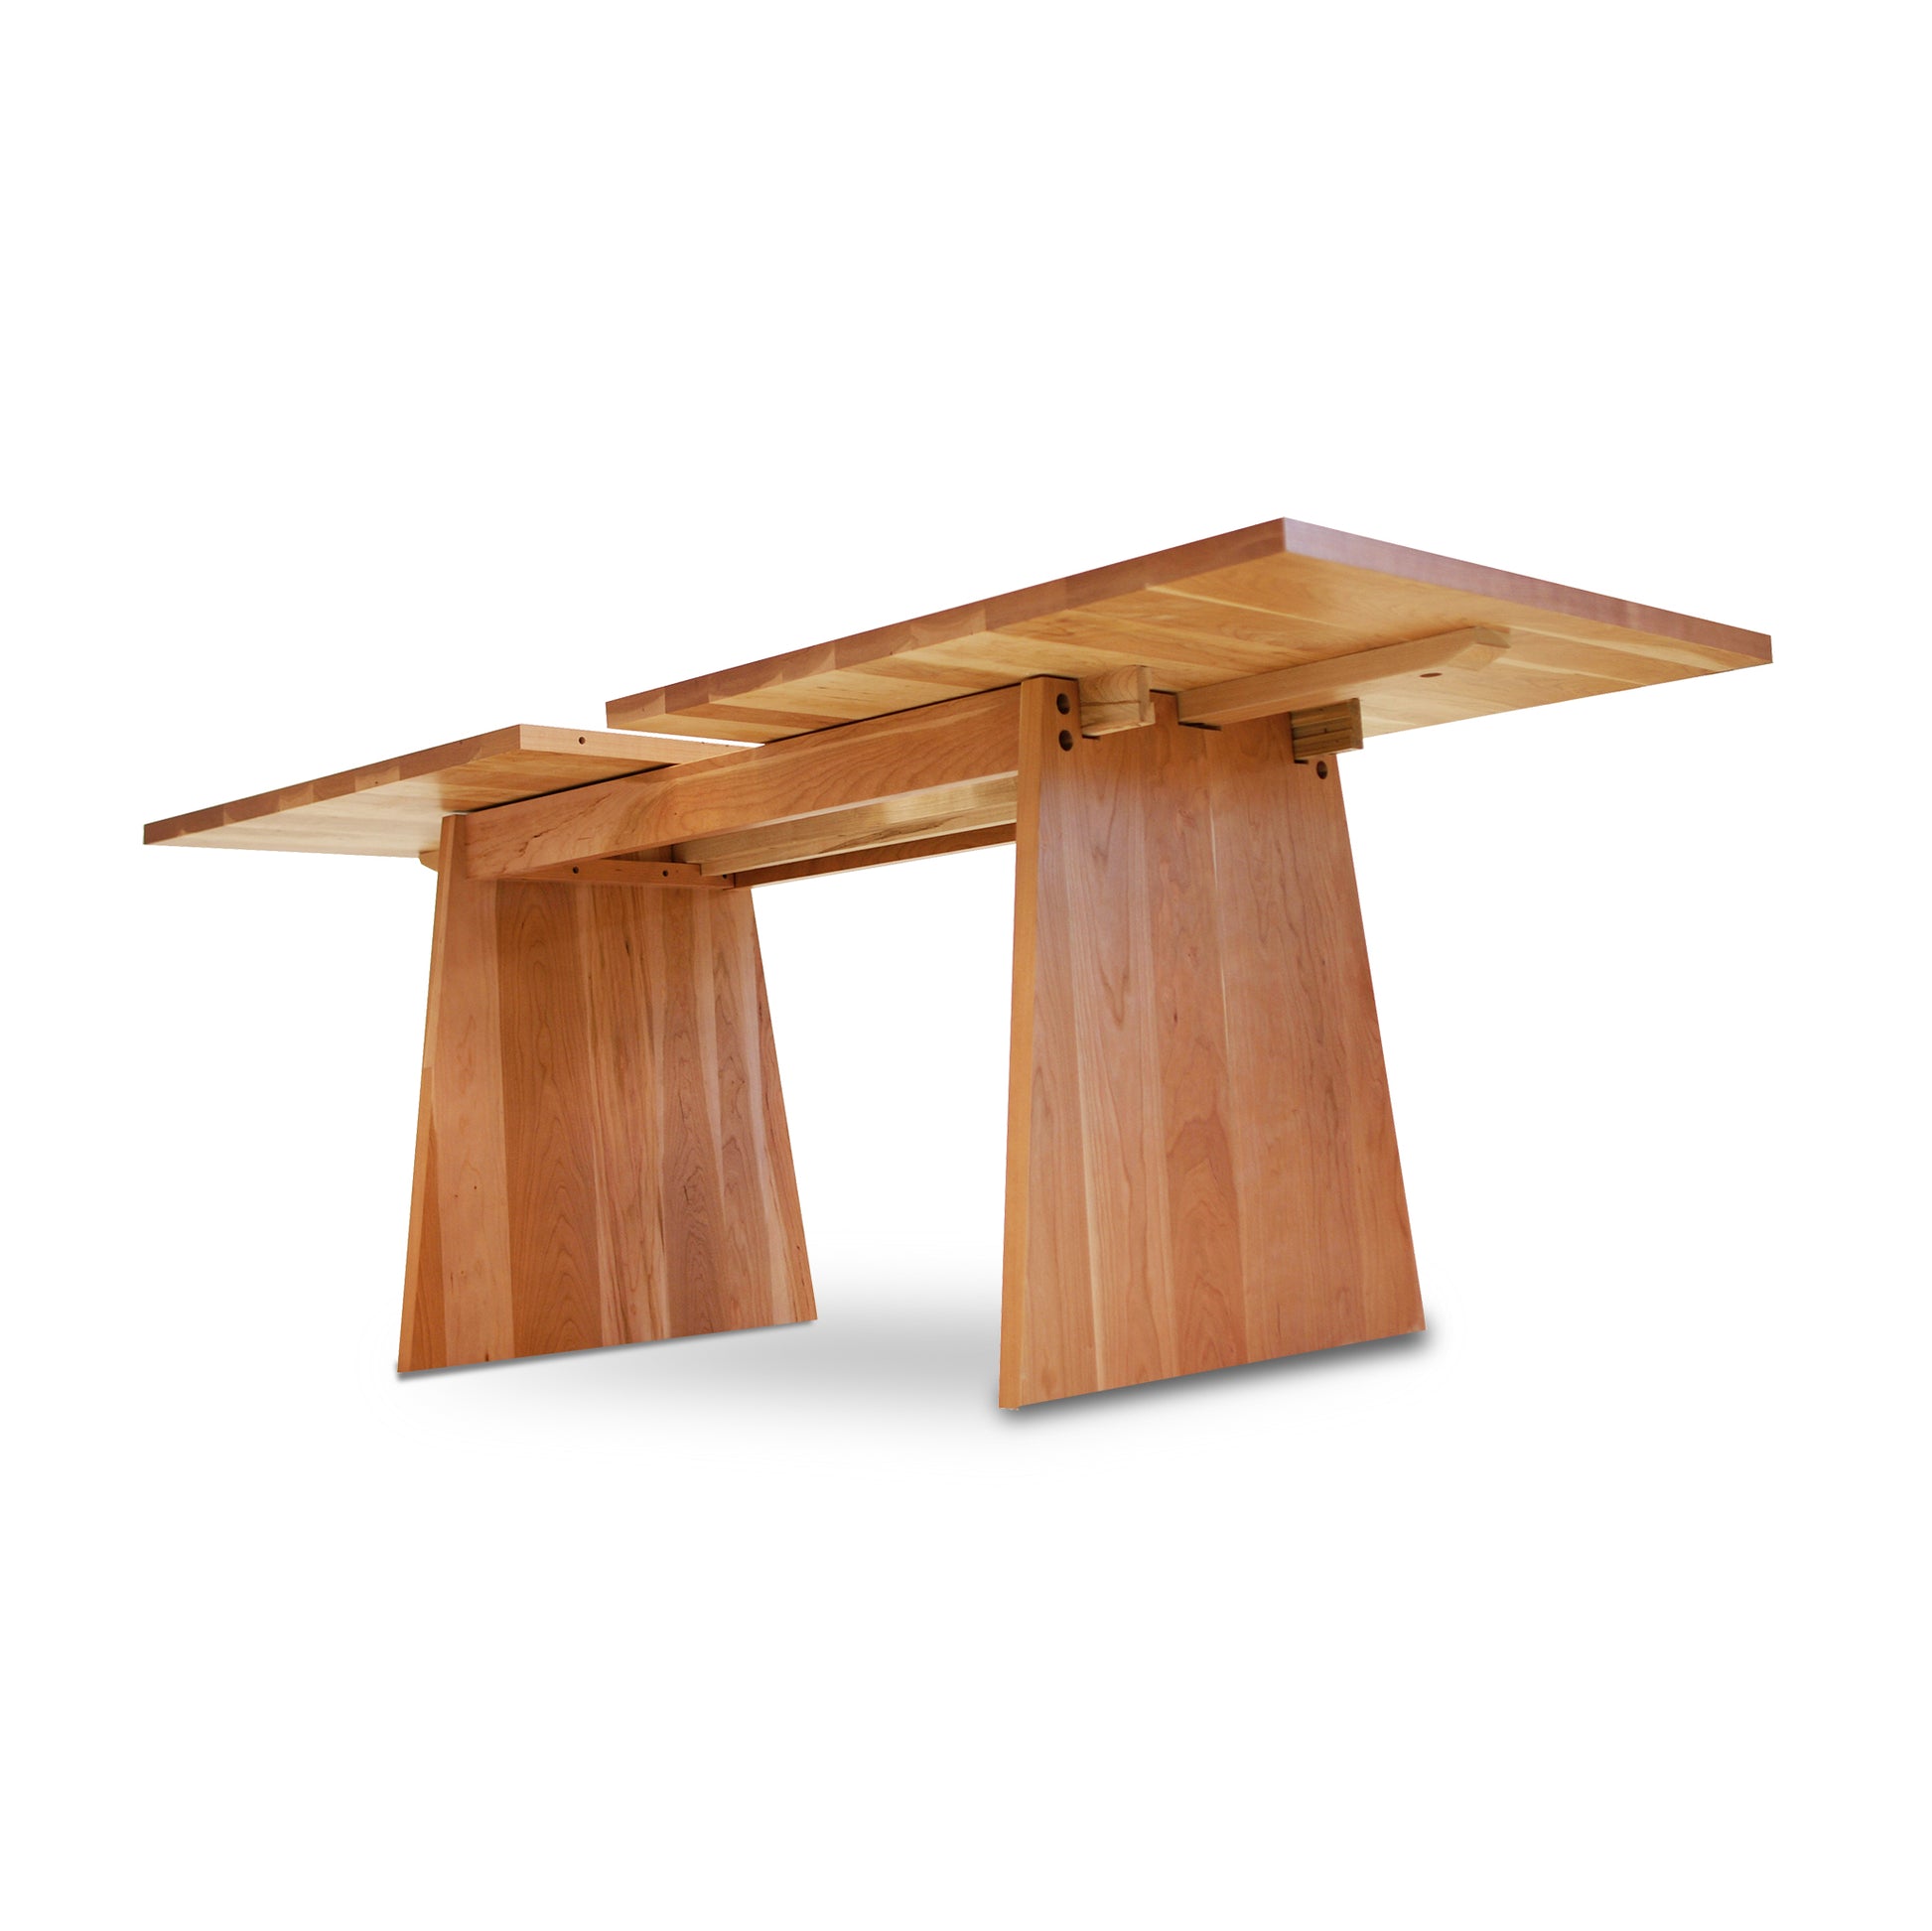 An eco-friendly Modern Designer Extension Table with two legs by Lyndon Furniture.